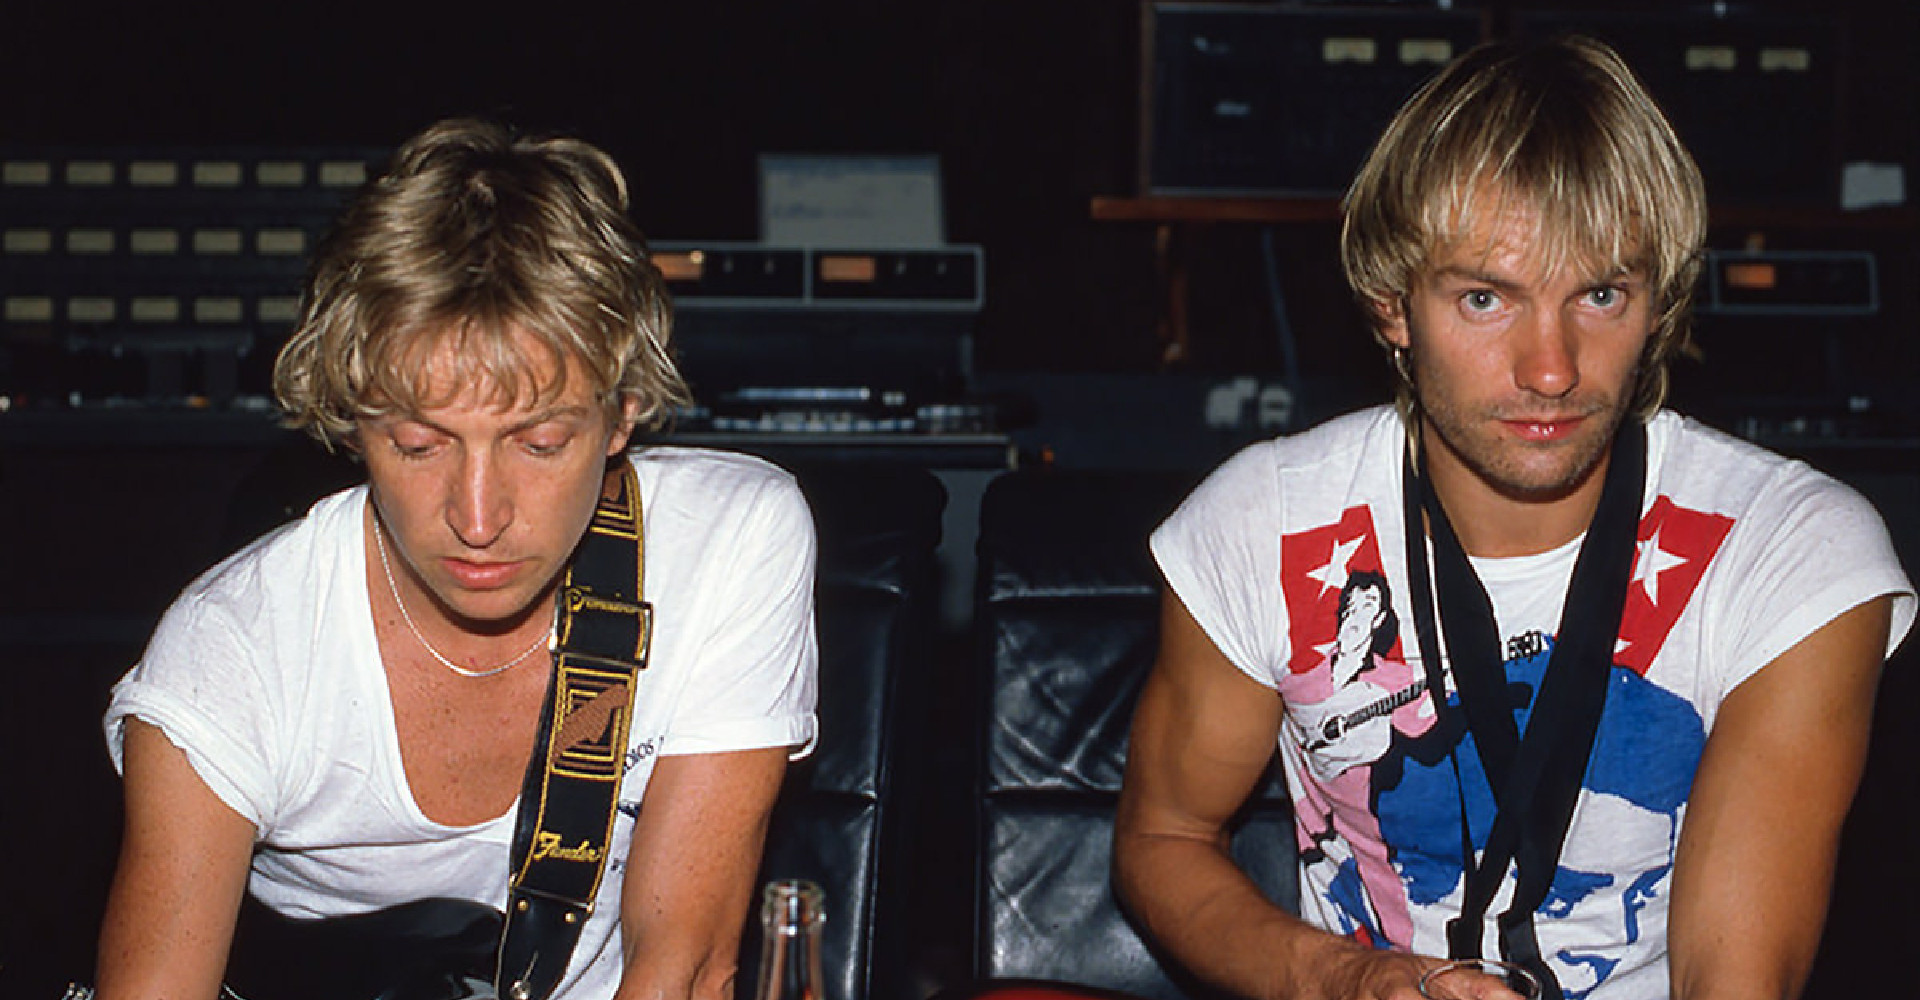 Andy Summers and Sting in Monserrat studio